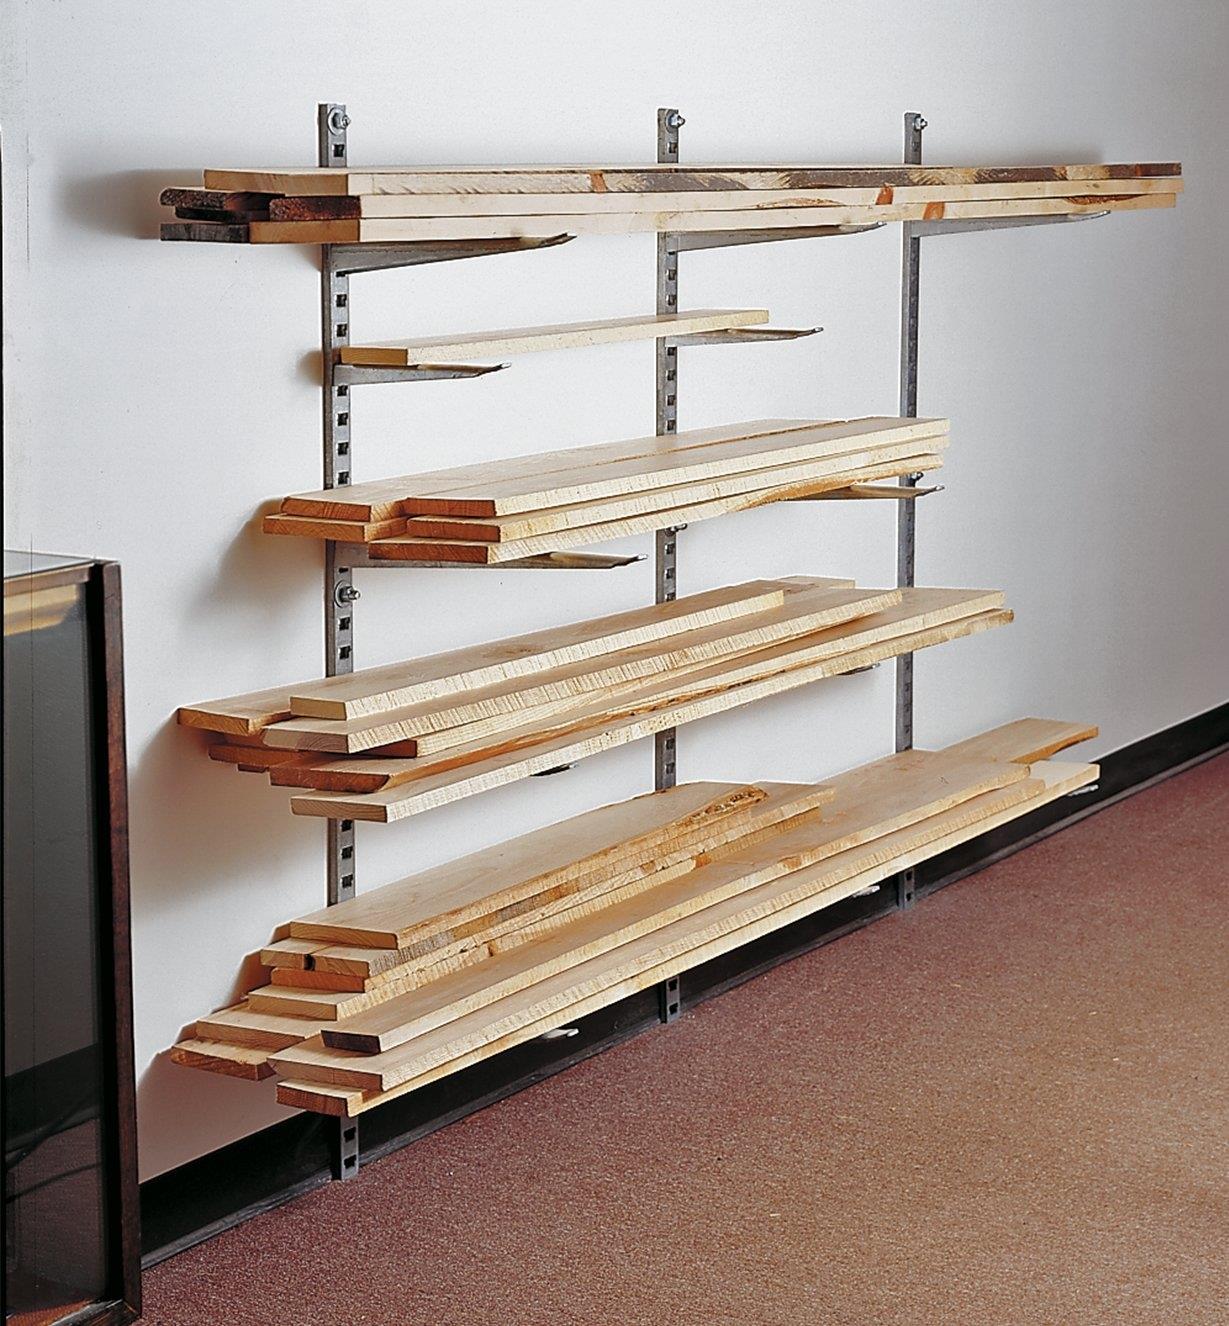 Example of installed lumber storage system holding various sizes of lumber